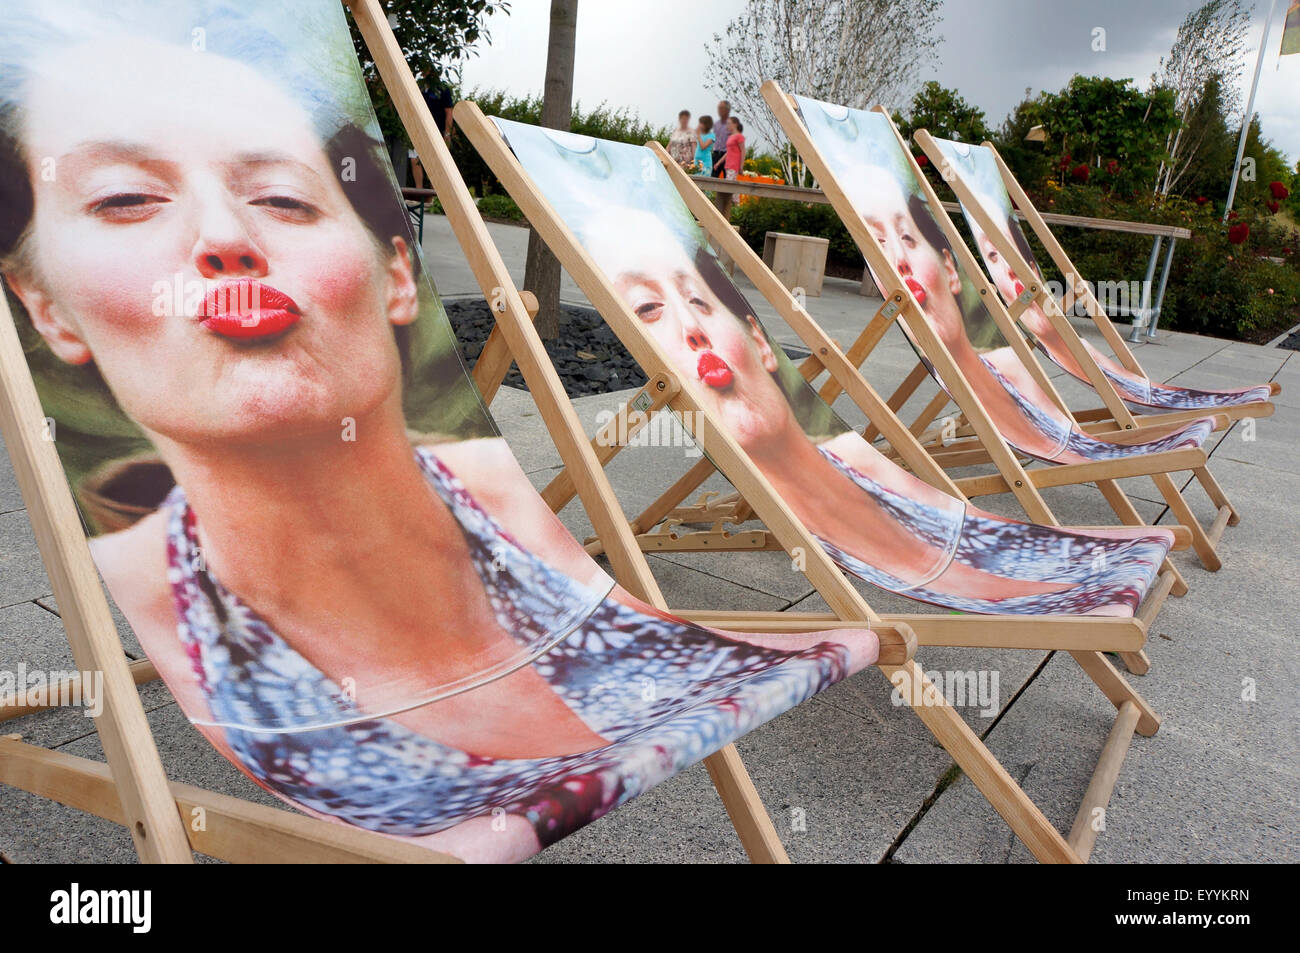 women with puckered lips as cover on canvas chairs, Germany Stock Photo